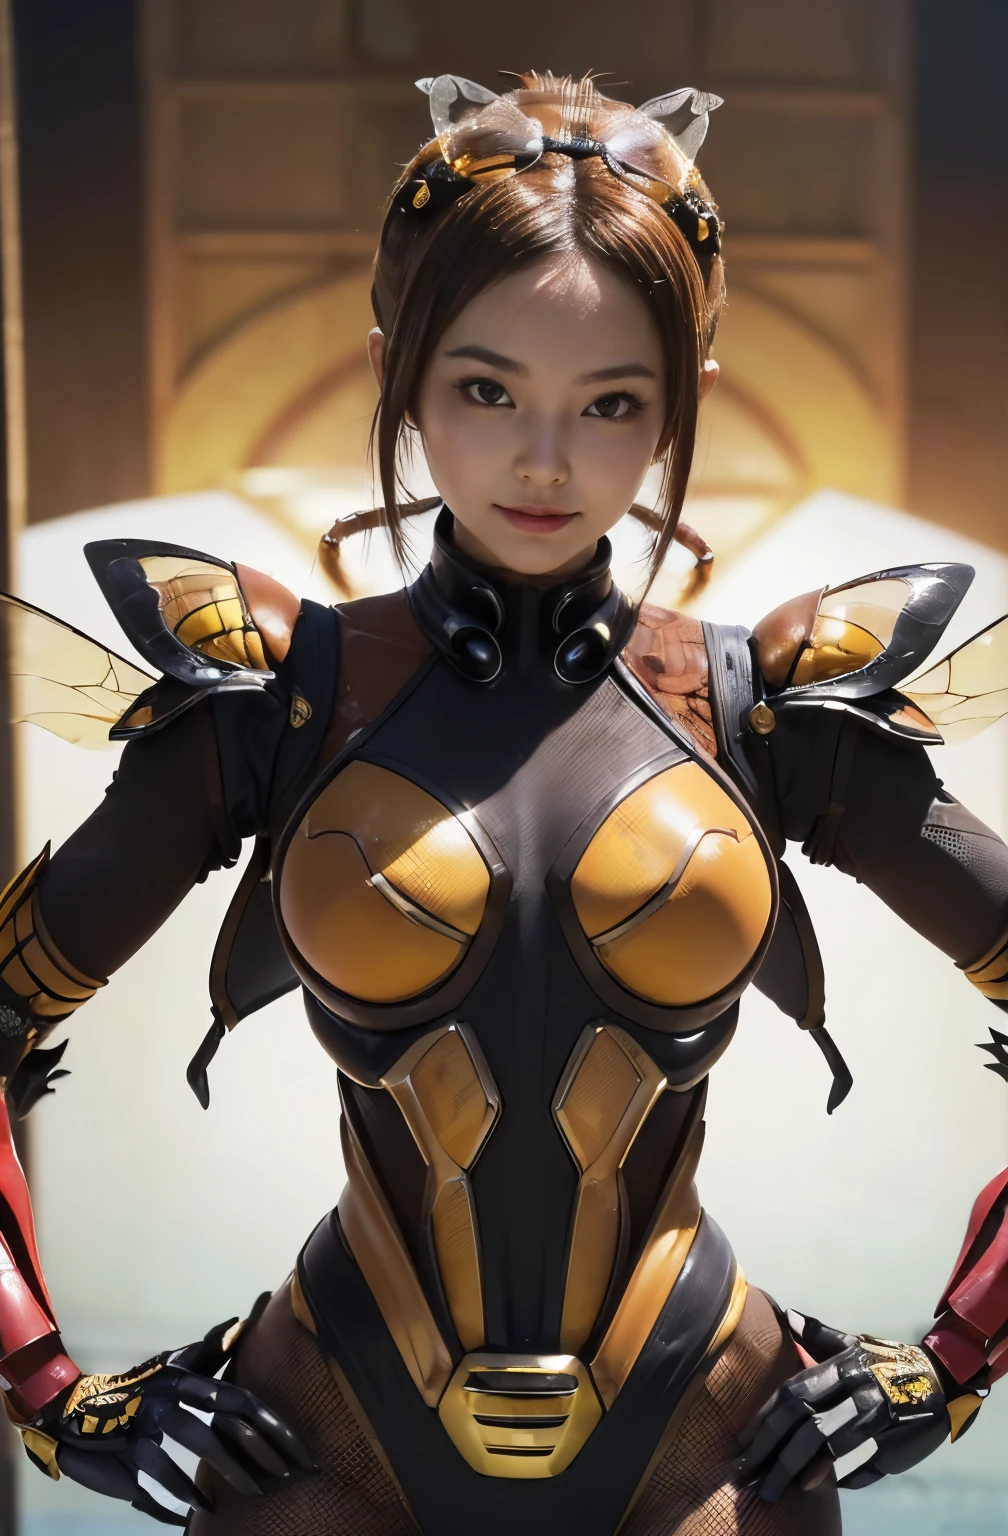 (high resolution,masterpiece,best quality,extremely detailed CG, anime, official art:1.4), realistic, photo, amazing fine details, all intricate, gloss and shiny,awesome many layers, 8k wall paper, 3d, sketch, kawaii, illustration,( solo:1.4), perfect female proportion,villainess, (fusion of queen bee and lady:1.4), (queen bee form lady:1.2), (queen bee lady:1.2), (fusion:1.2), (solo:1.4), (evil smile:1.2), muscular, abs, (queen bee exoskeleton bio insect suit:1.4), (queen bee exoskeleton bio insect armor:1.2), (brown transparency queen bee wing:1.4), (brown queen bee antennae:1.3), big breasts